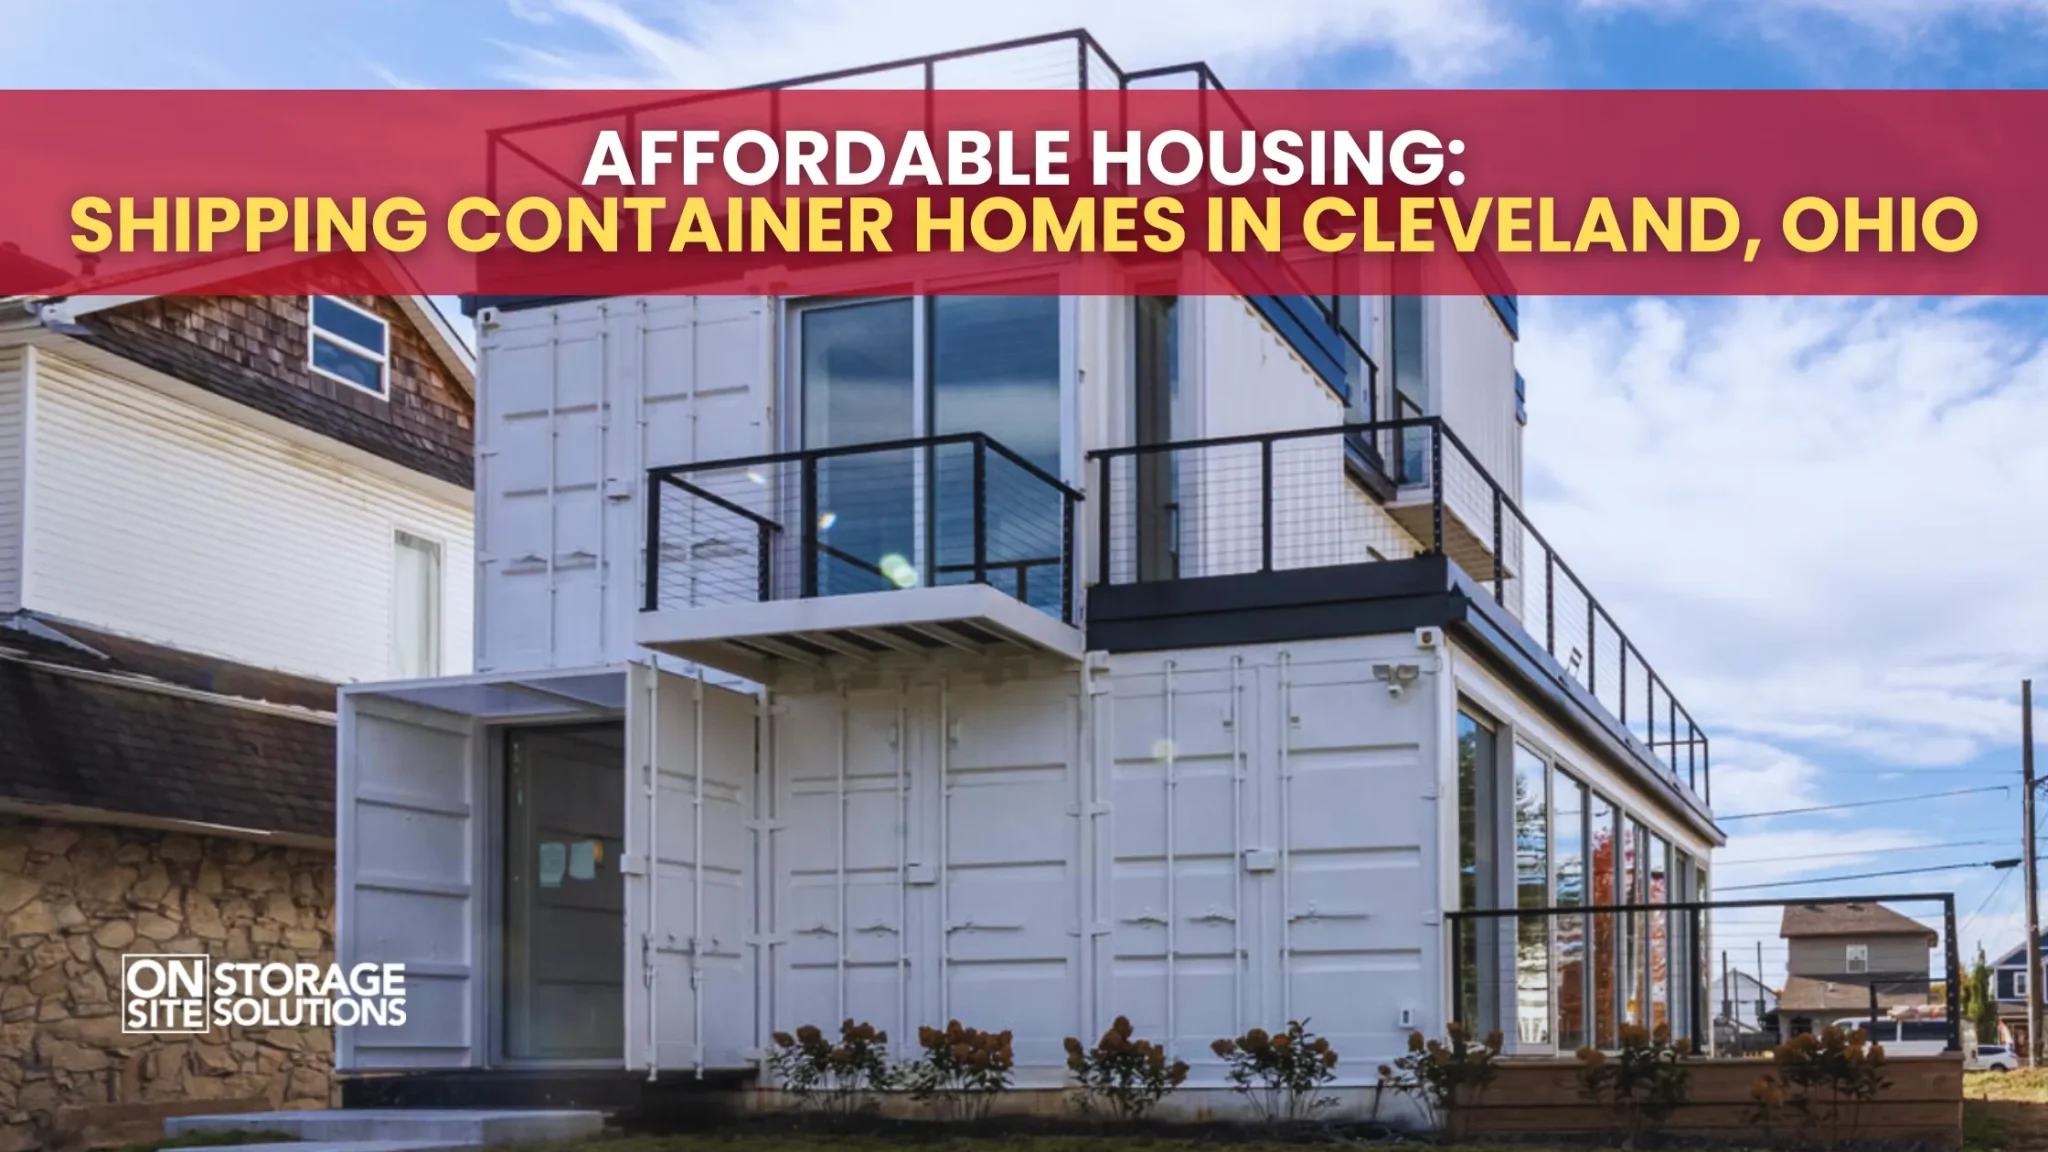 Affordable Housing: Shipping Container Homes in Cleveland, Ohio